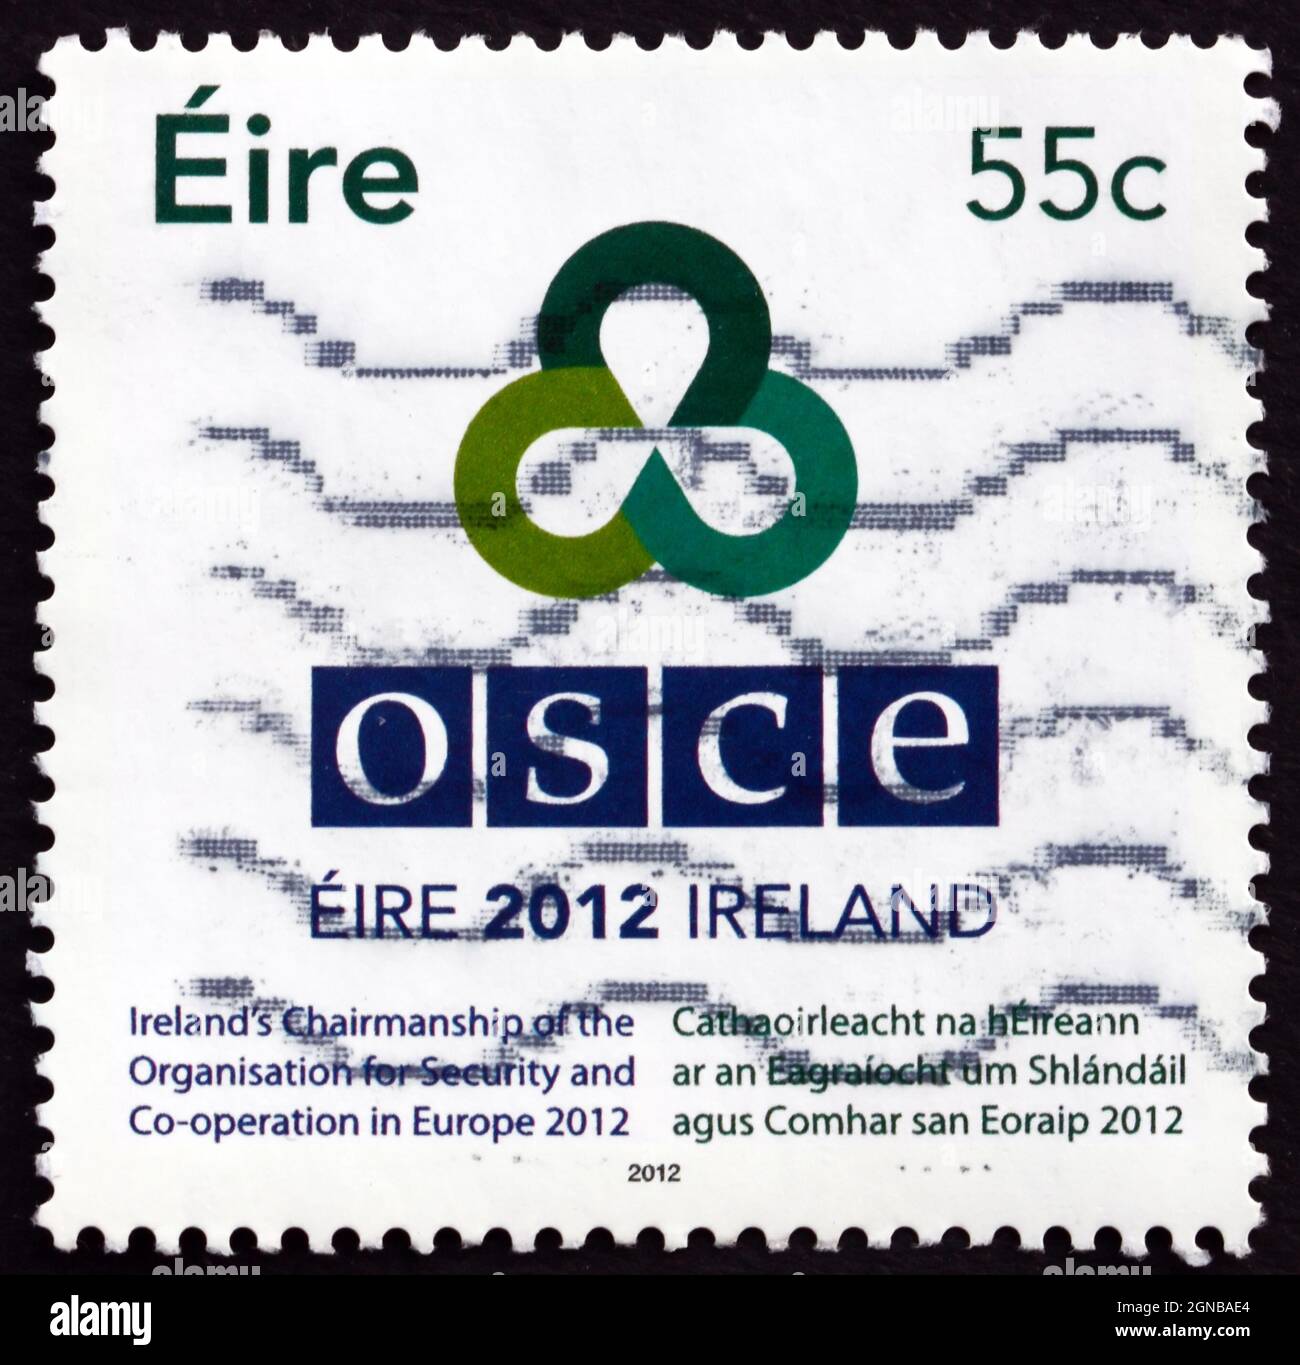 IRELAND - CIRCA 2012: a stamp printed in Ireland shows Irish Presidency of OSCE, Organization for Security and Co-operation in Europe, circa 2012 Stock Photo